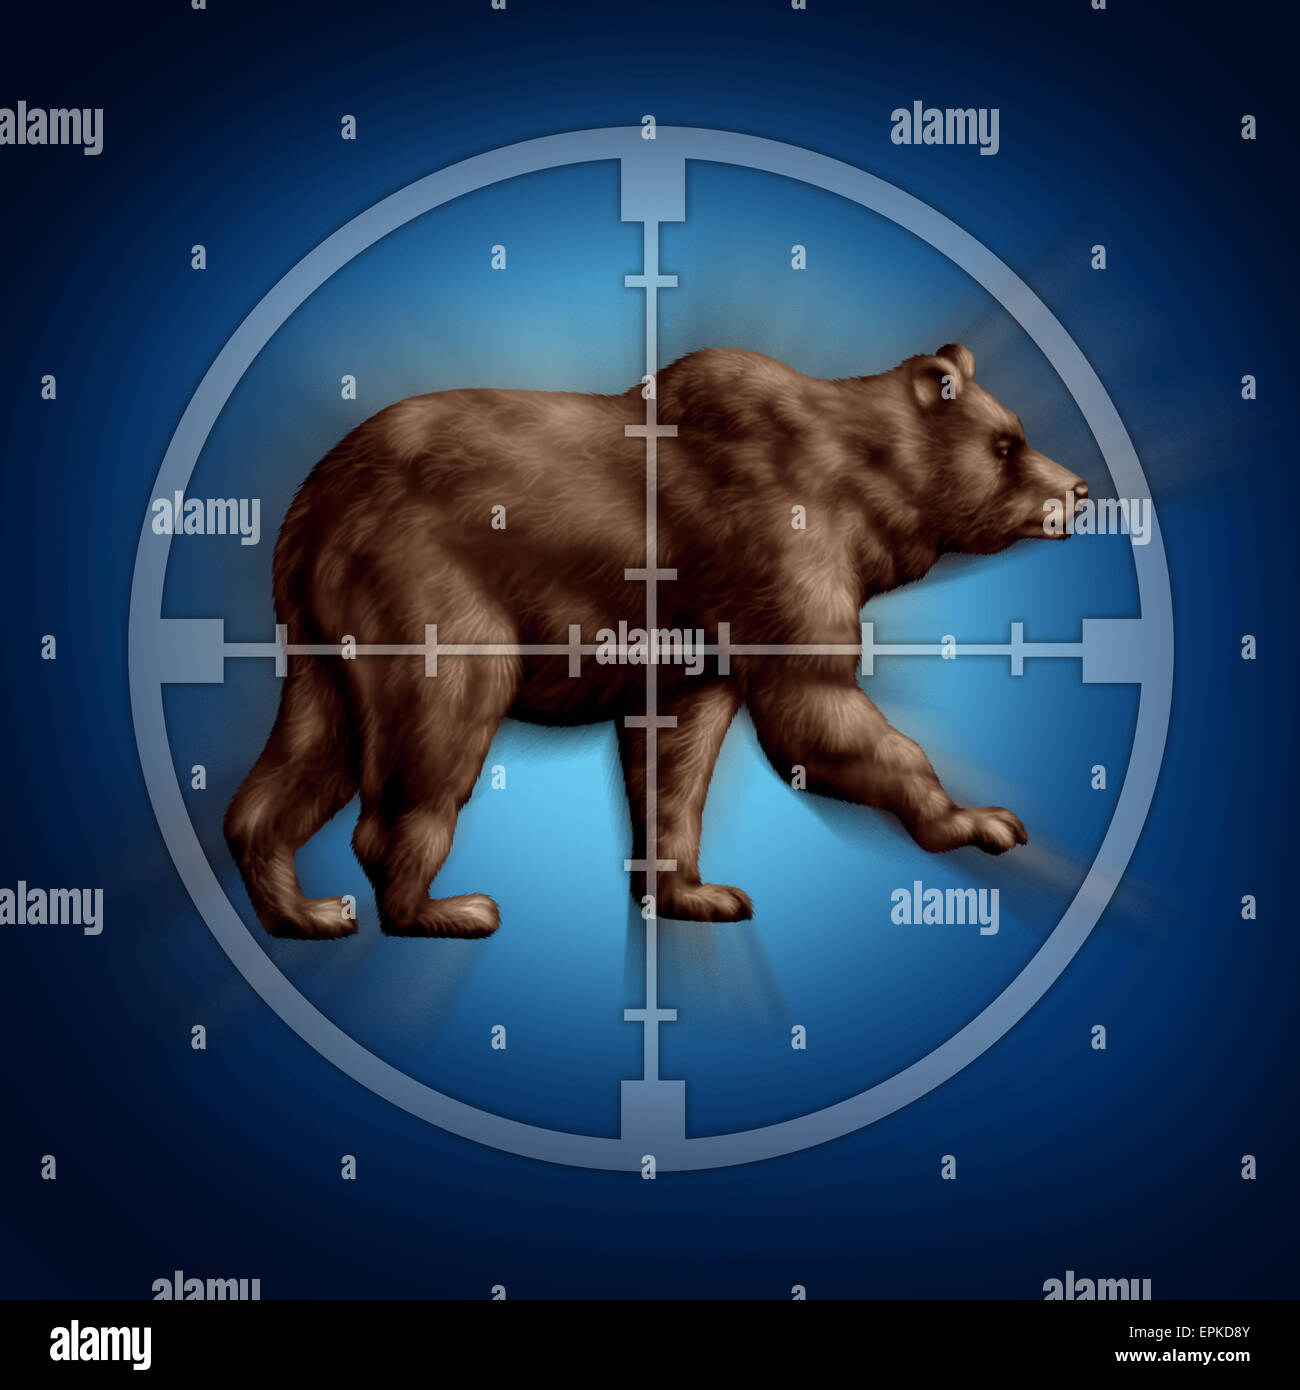 Bear market target business concept as an icon of targeting investor doubt and lack of confidence in stock trading predicting future price decreases as a financial loss of wealth and conservative investing. Stock Photo